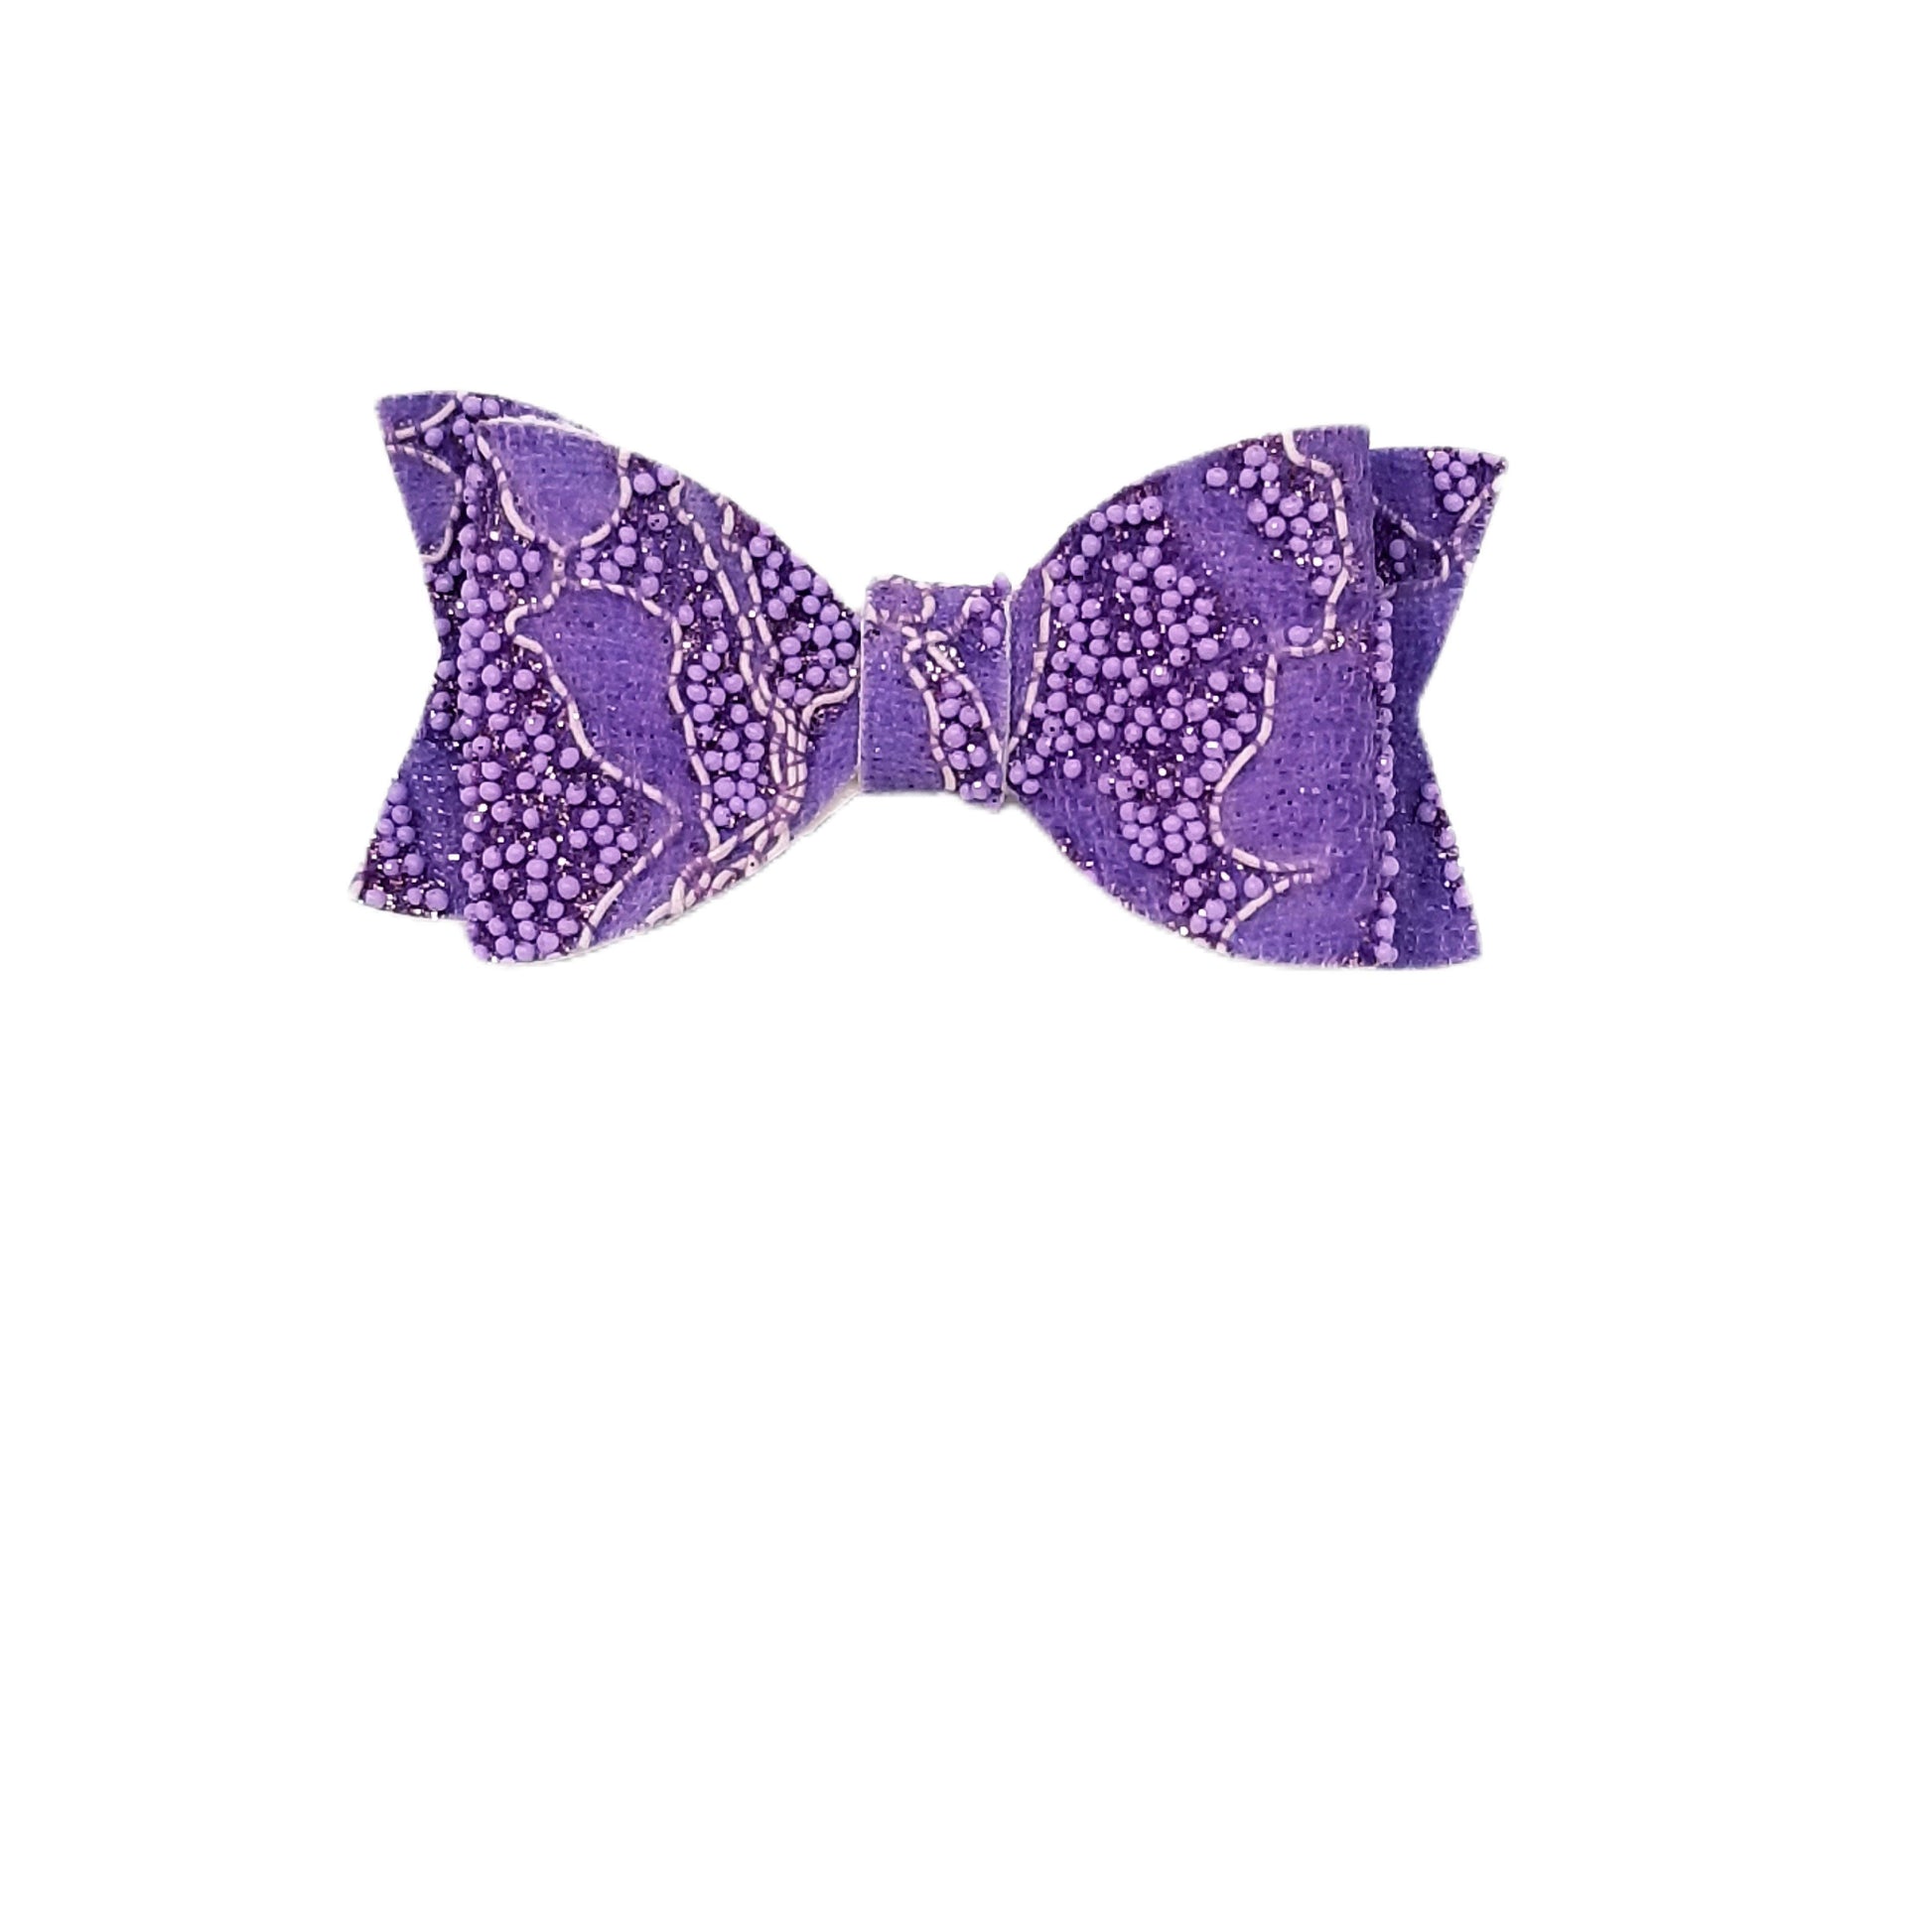 2.75 inch Lavender Beaded Lace Claire Bow (pair)